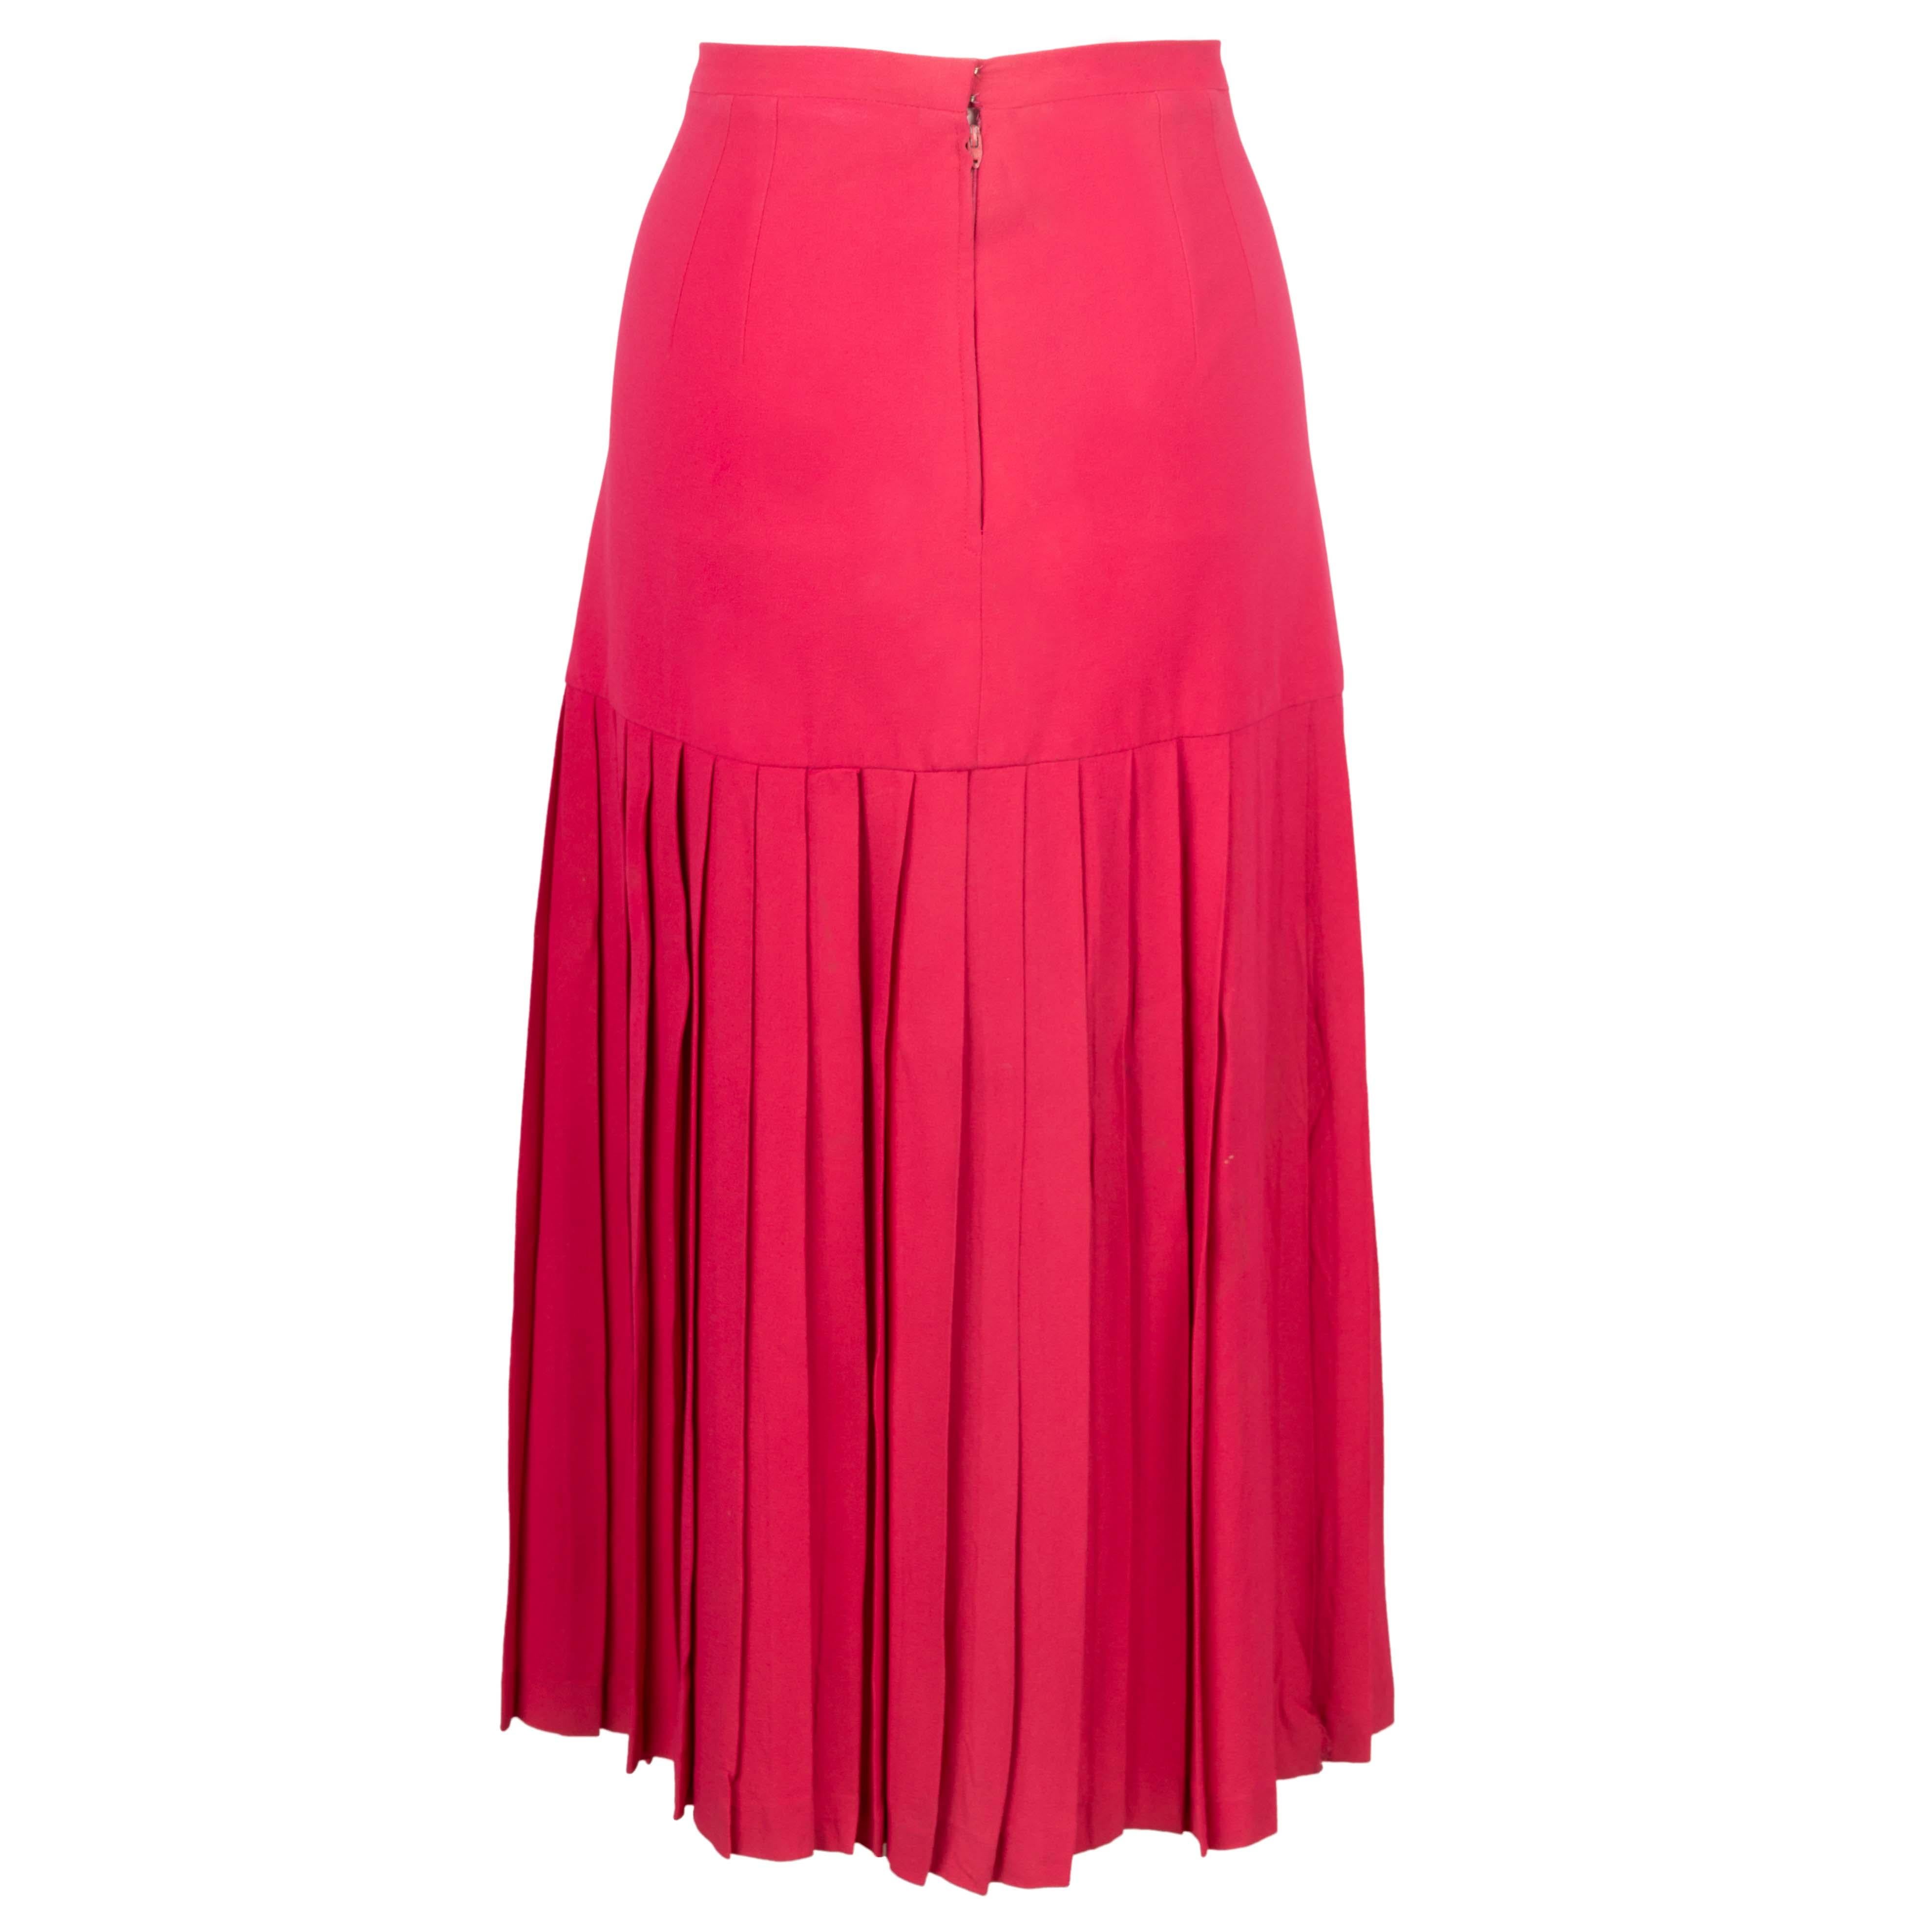 Made in Italy, the Valentino Pink Pleated Skirt is a stunning piece that adds a subtle bright hue to the look. With a fitted top half and a pleated bottom half, the unique textural element embellishes the simplest outfits by creating a chic edge.
